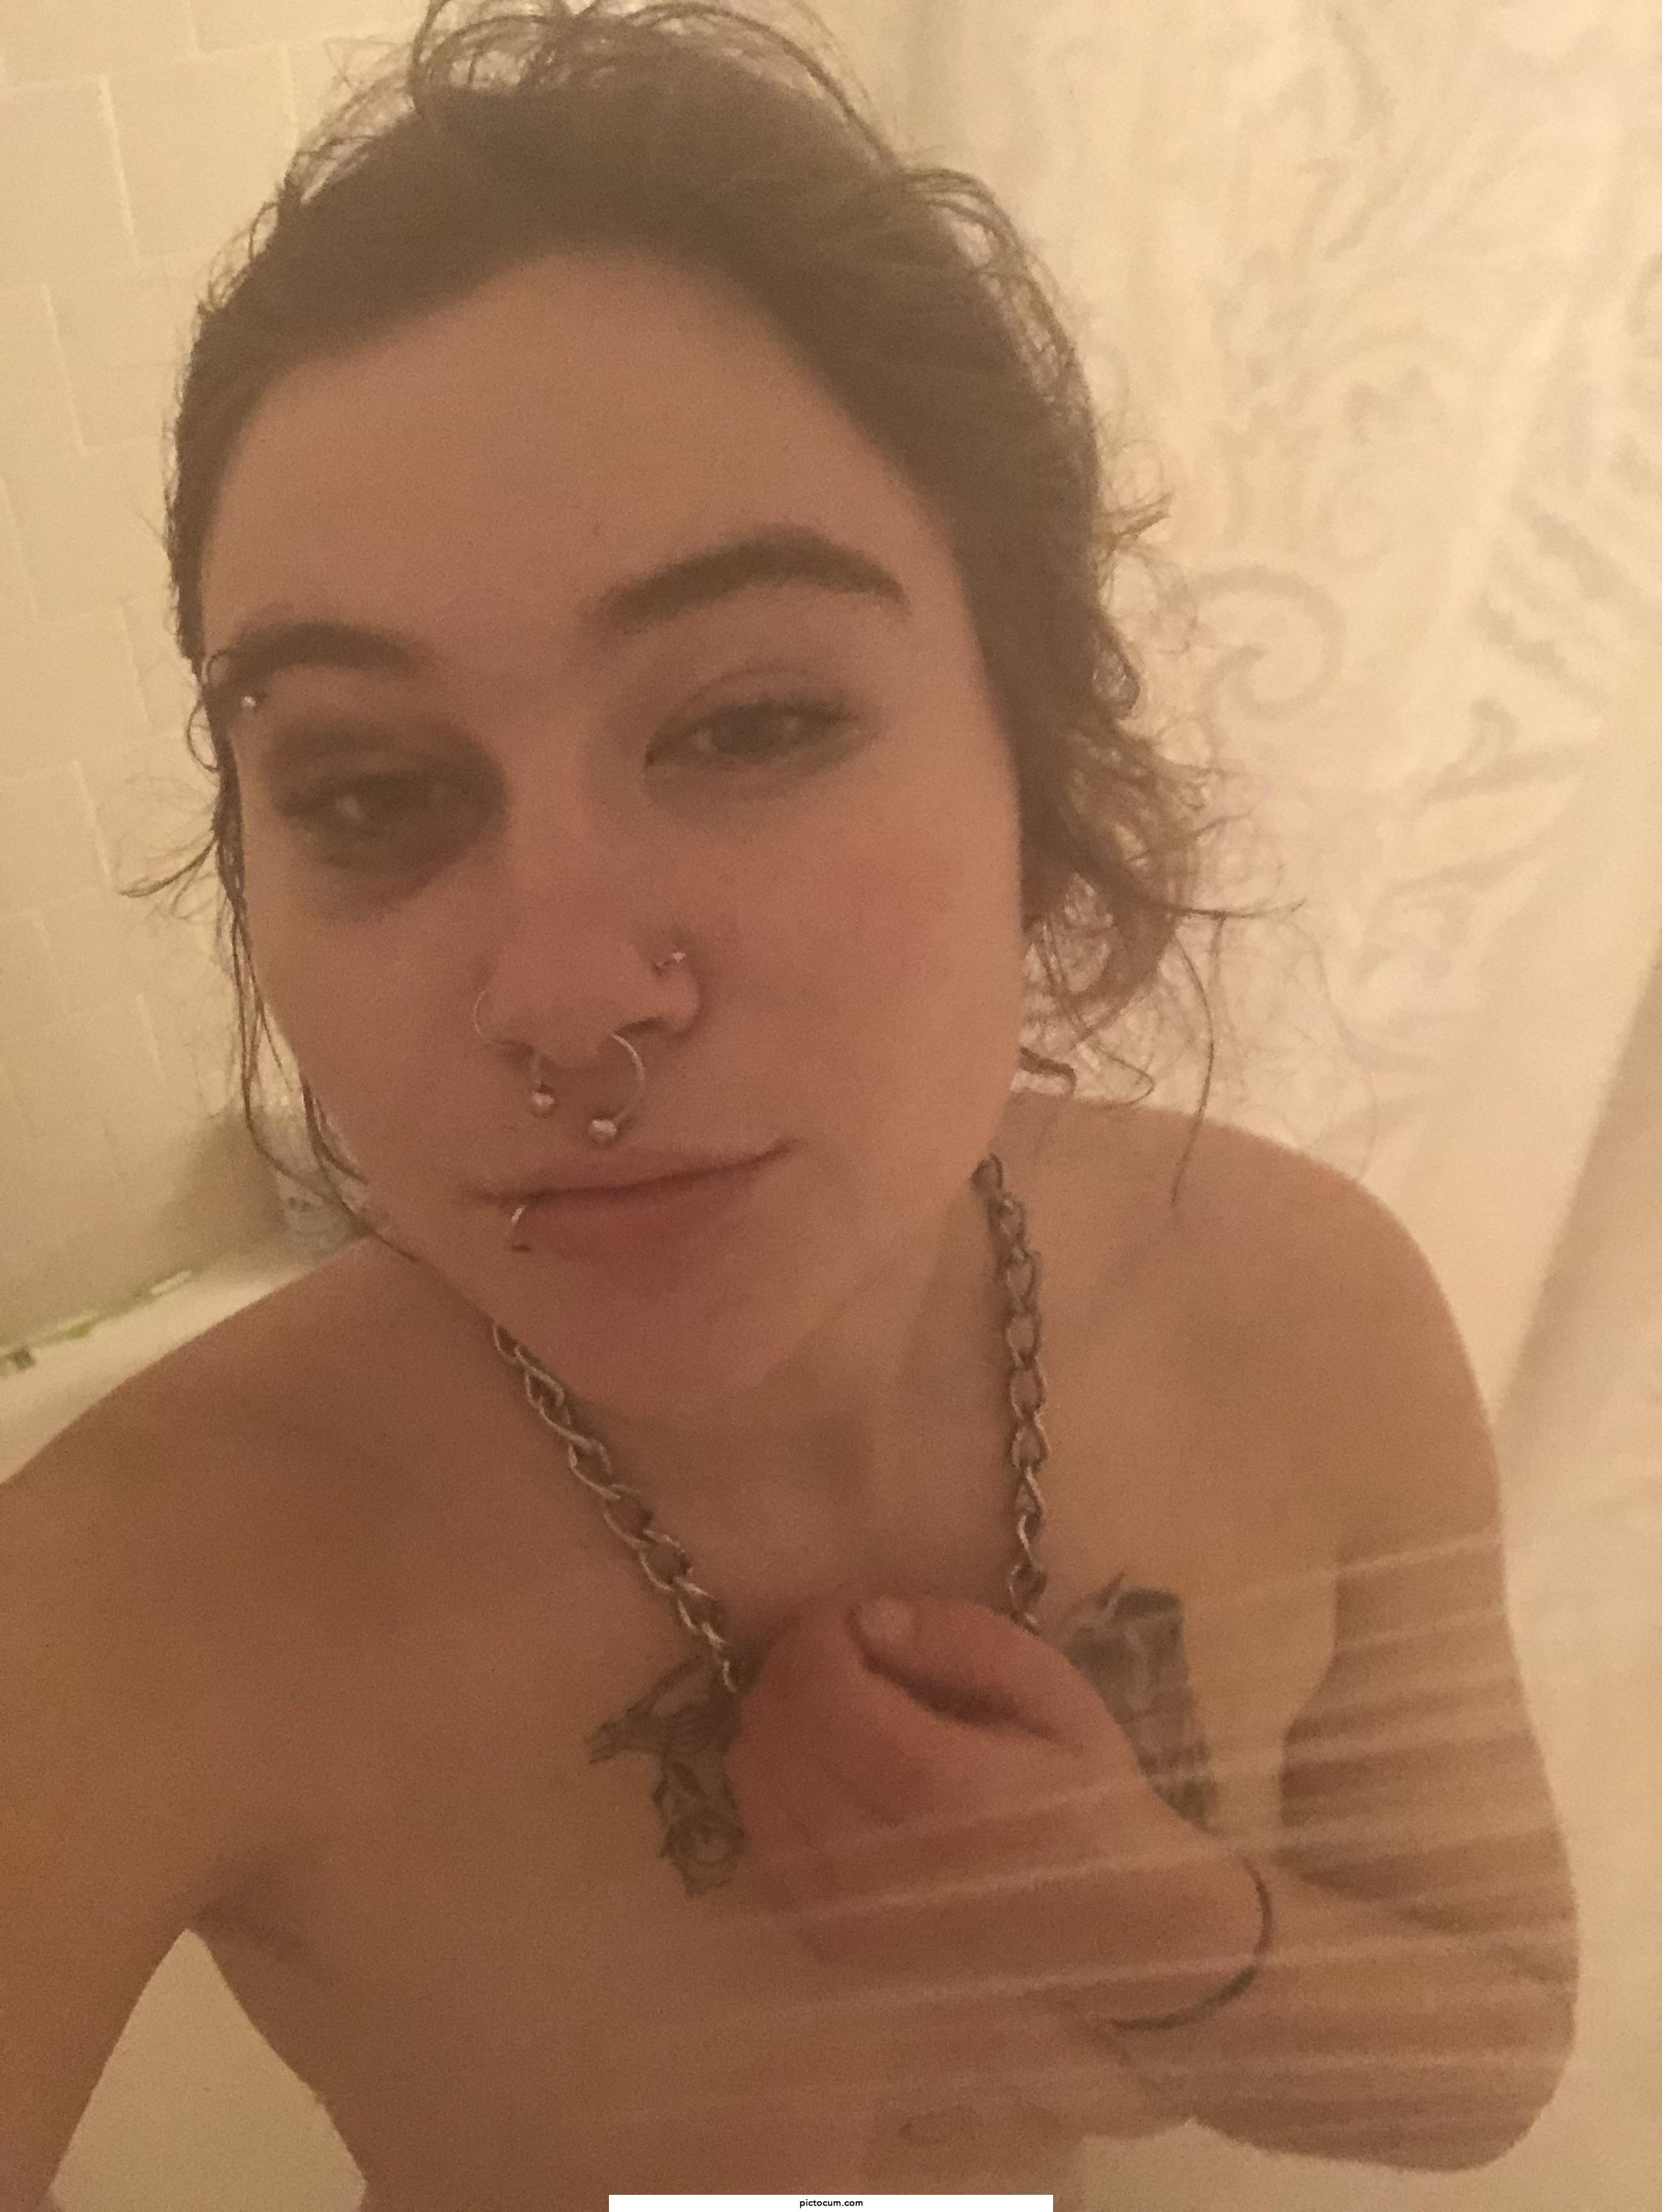 Pin me to the wall wet n soapy (; 19f